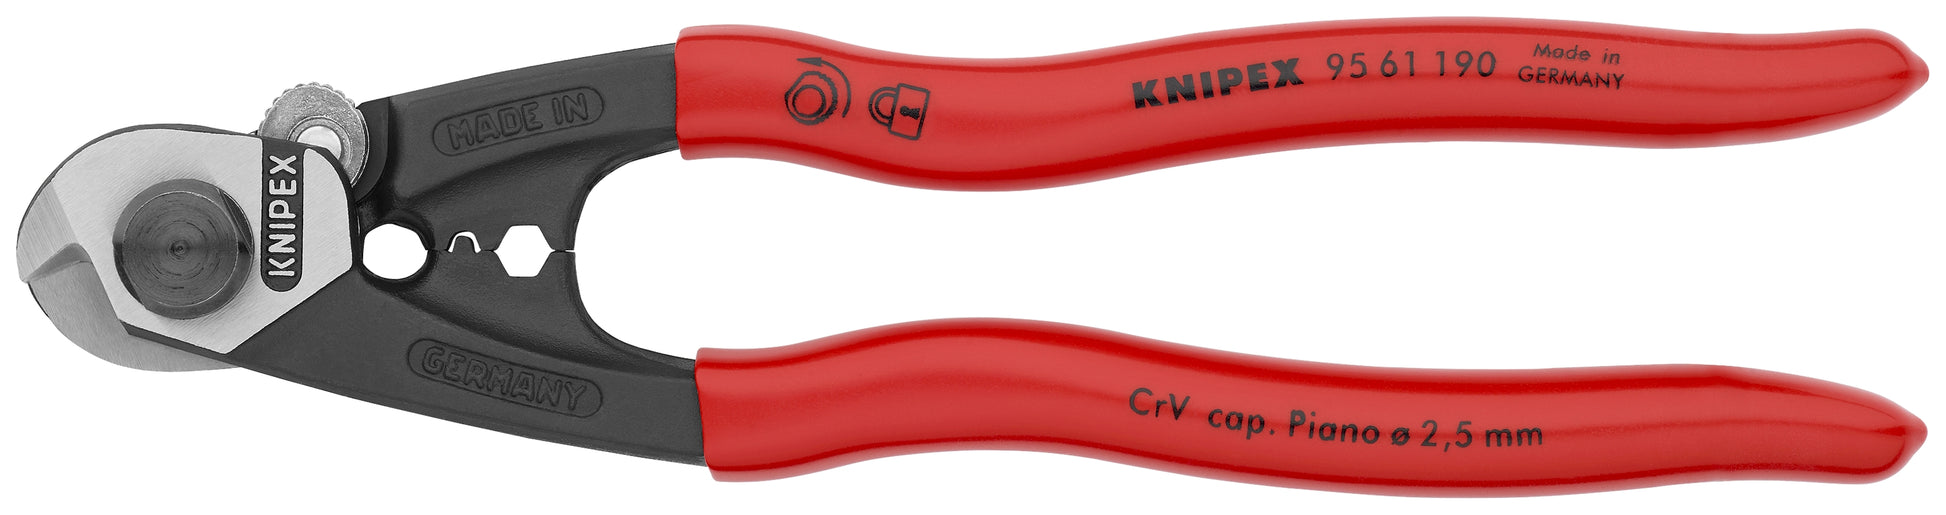 Knipex Wire Rope Cutter